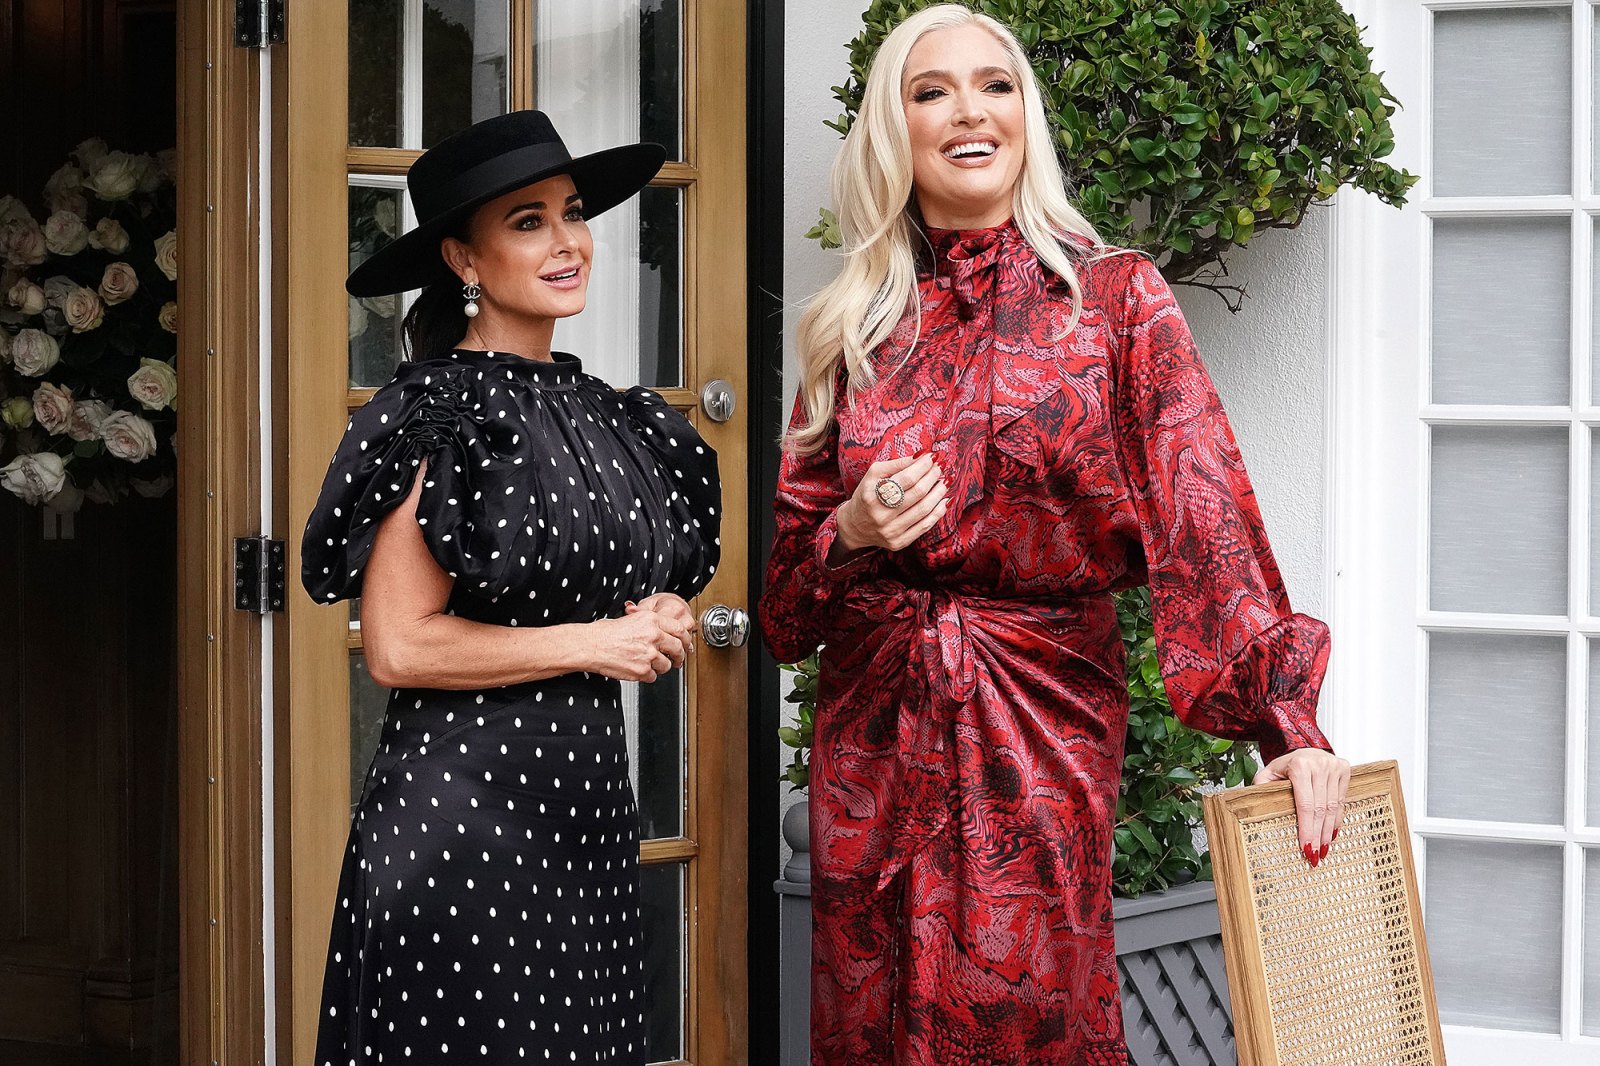 Erika Jayne Defends Herself After Being Told to Quit Real Housewives of Beverly Hills Kyle Richards